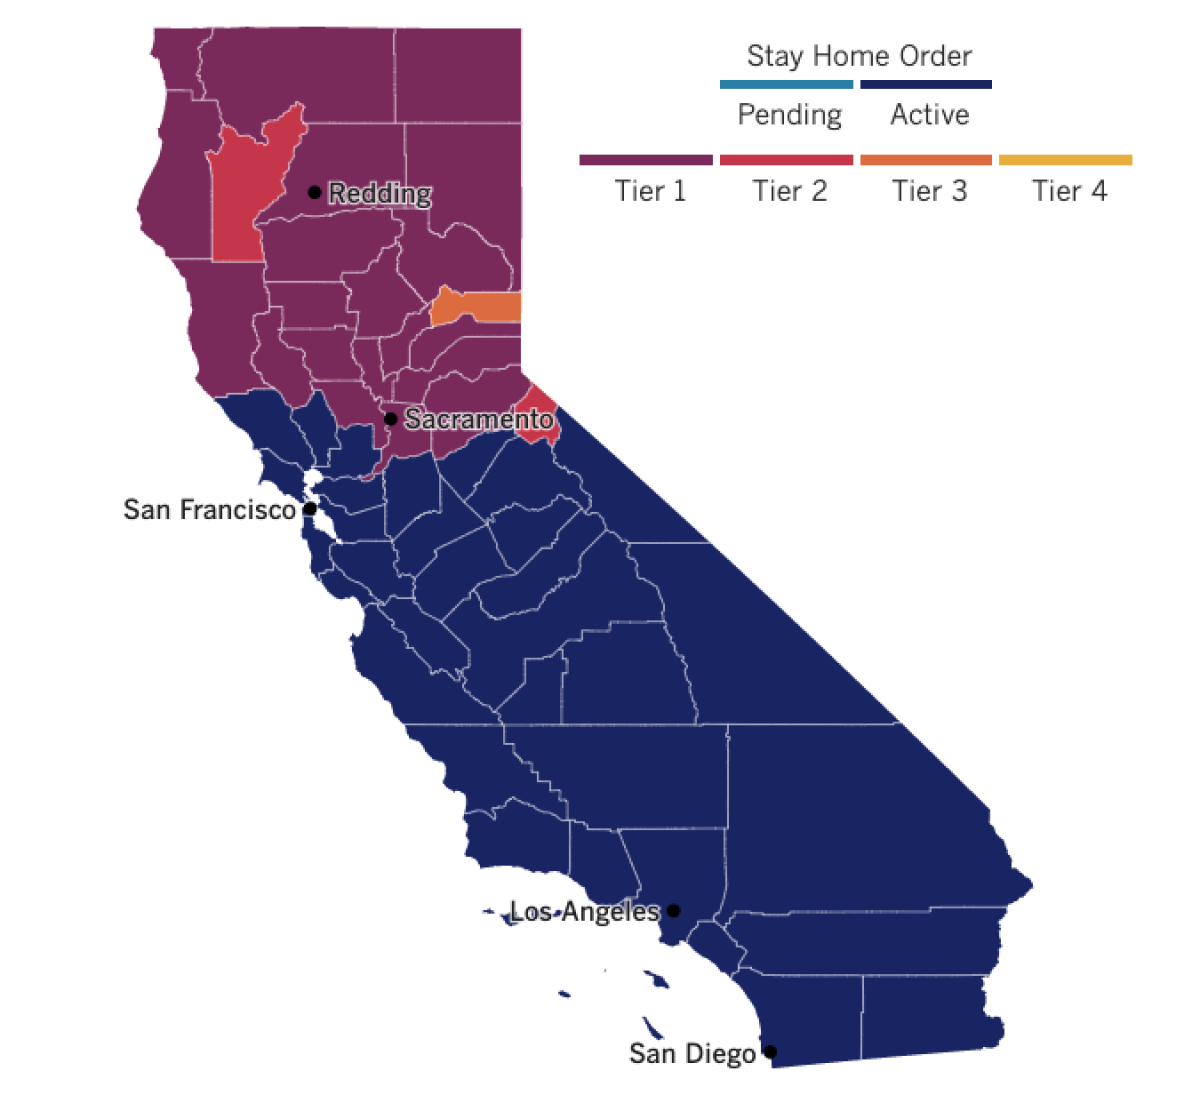 A map of California showing most of the state under stay-at-home order and most northern counties in tier 1.